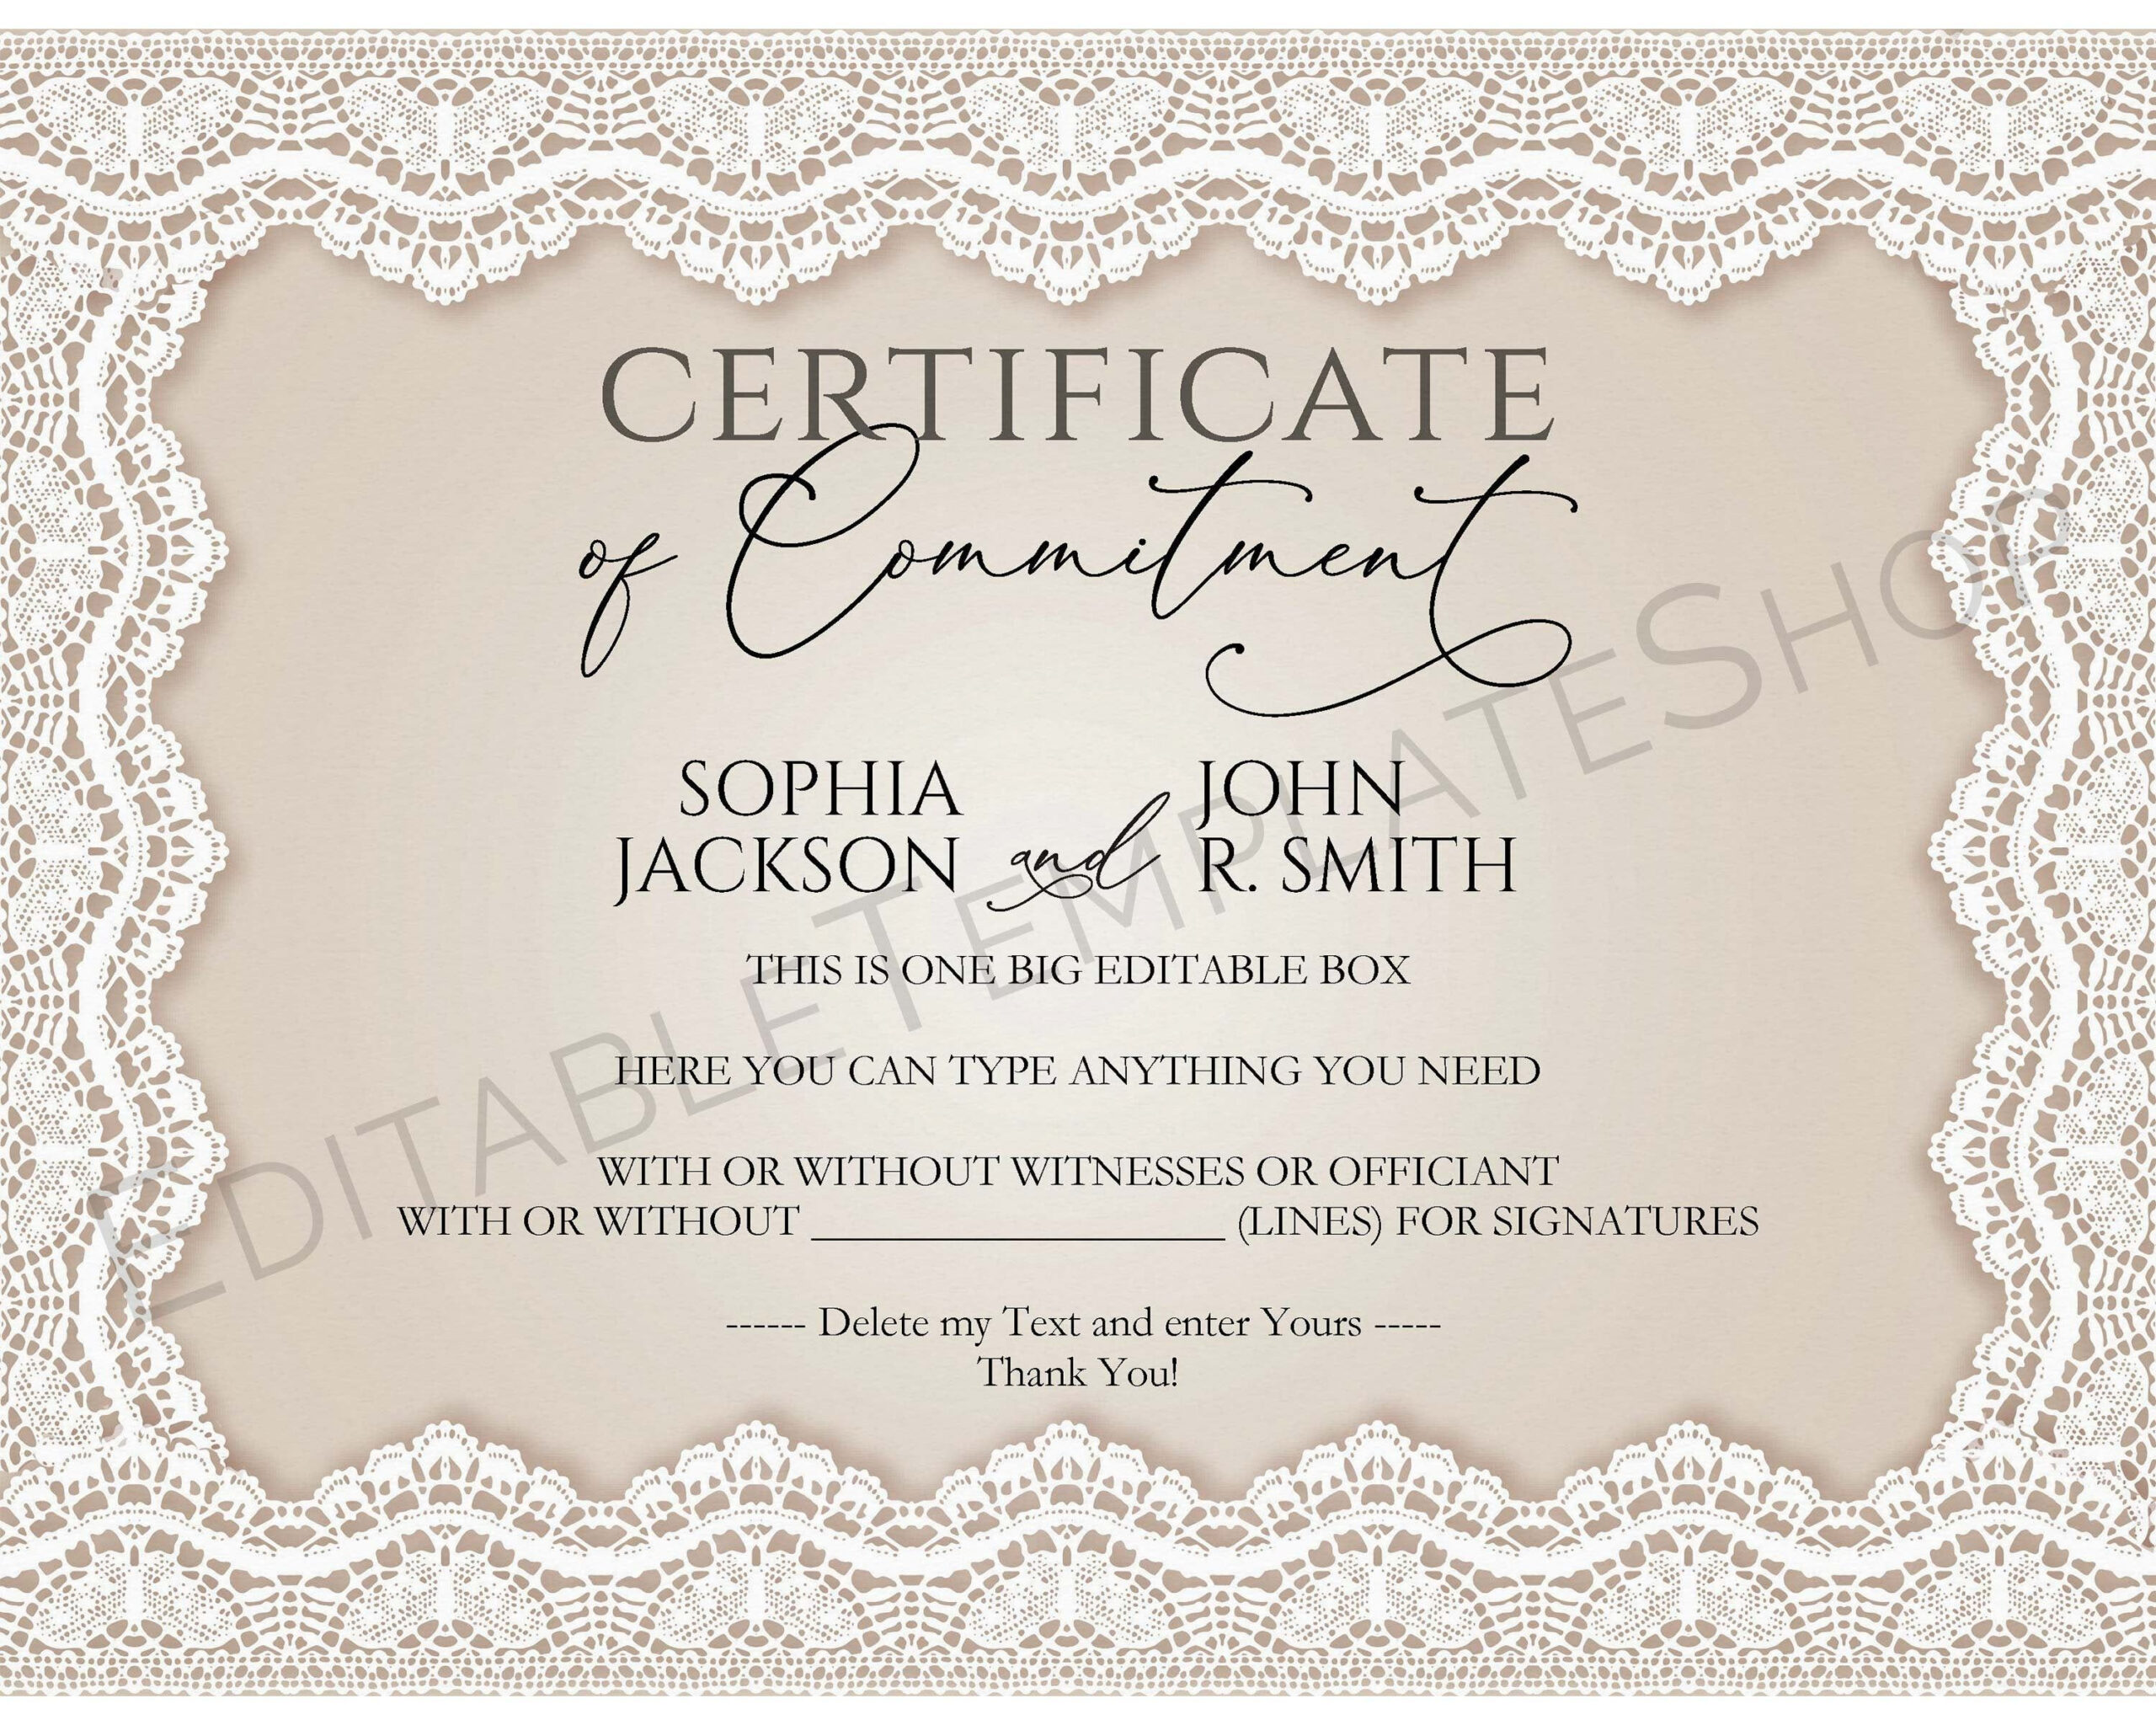 Free Printable Commitment Certificate Template - Printable in Commitment Certificate Free Printable